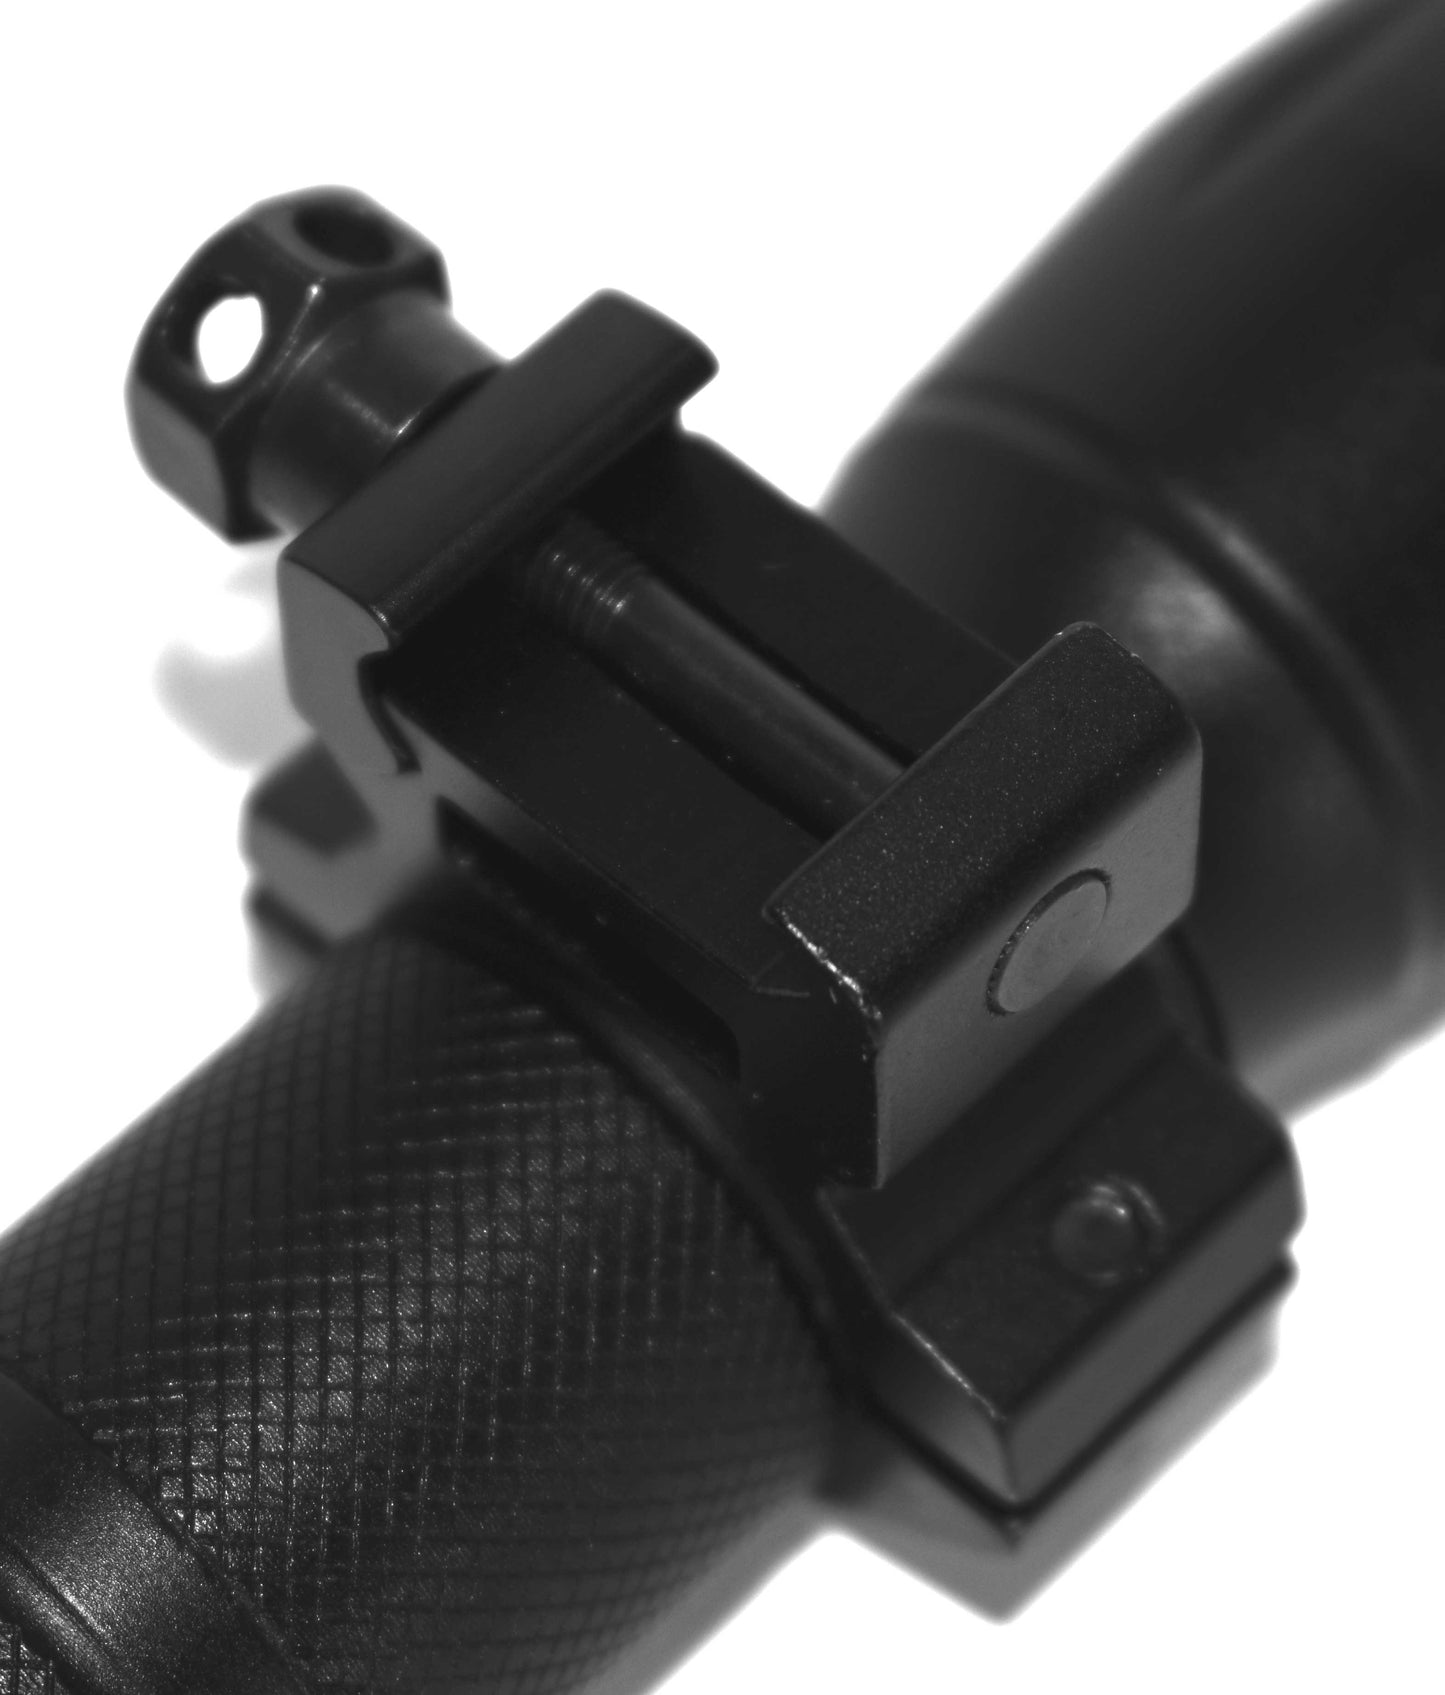 Trinity 1200 Lumen Flashlight With Mount Compatible With Rifles.